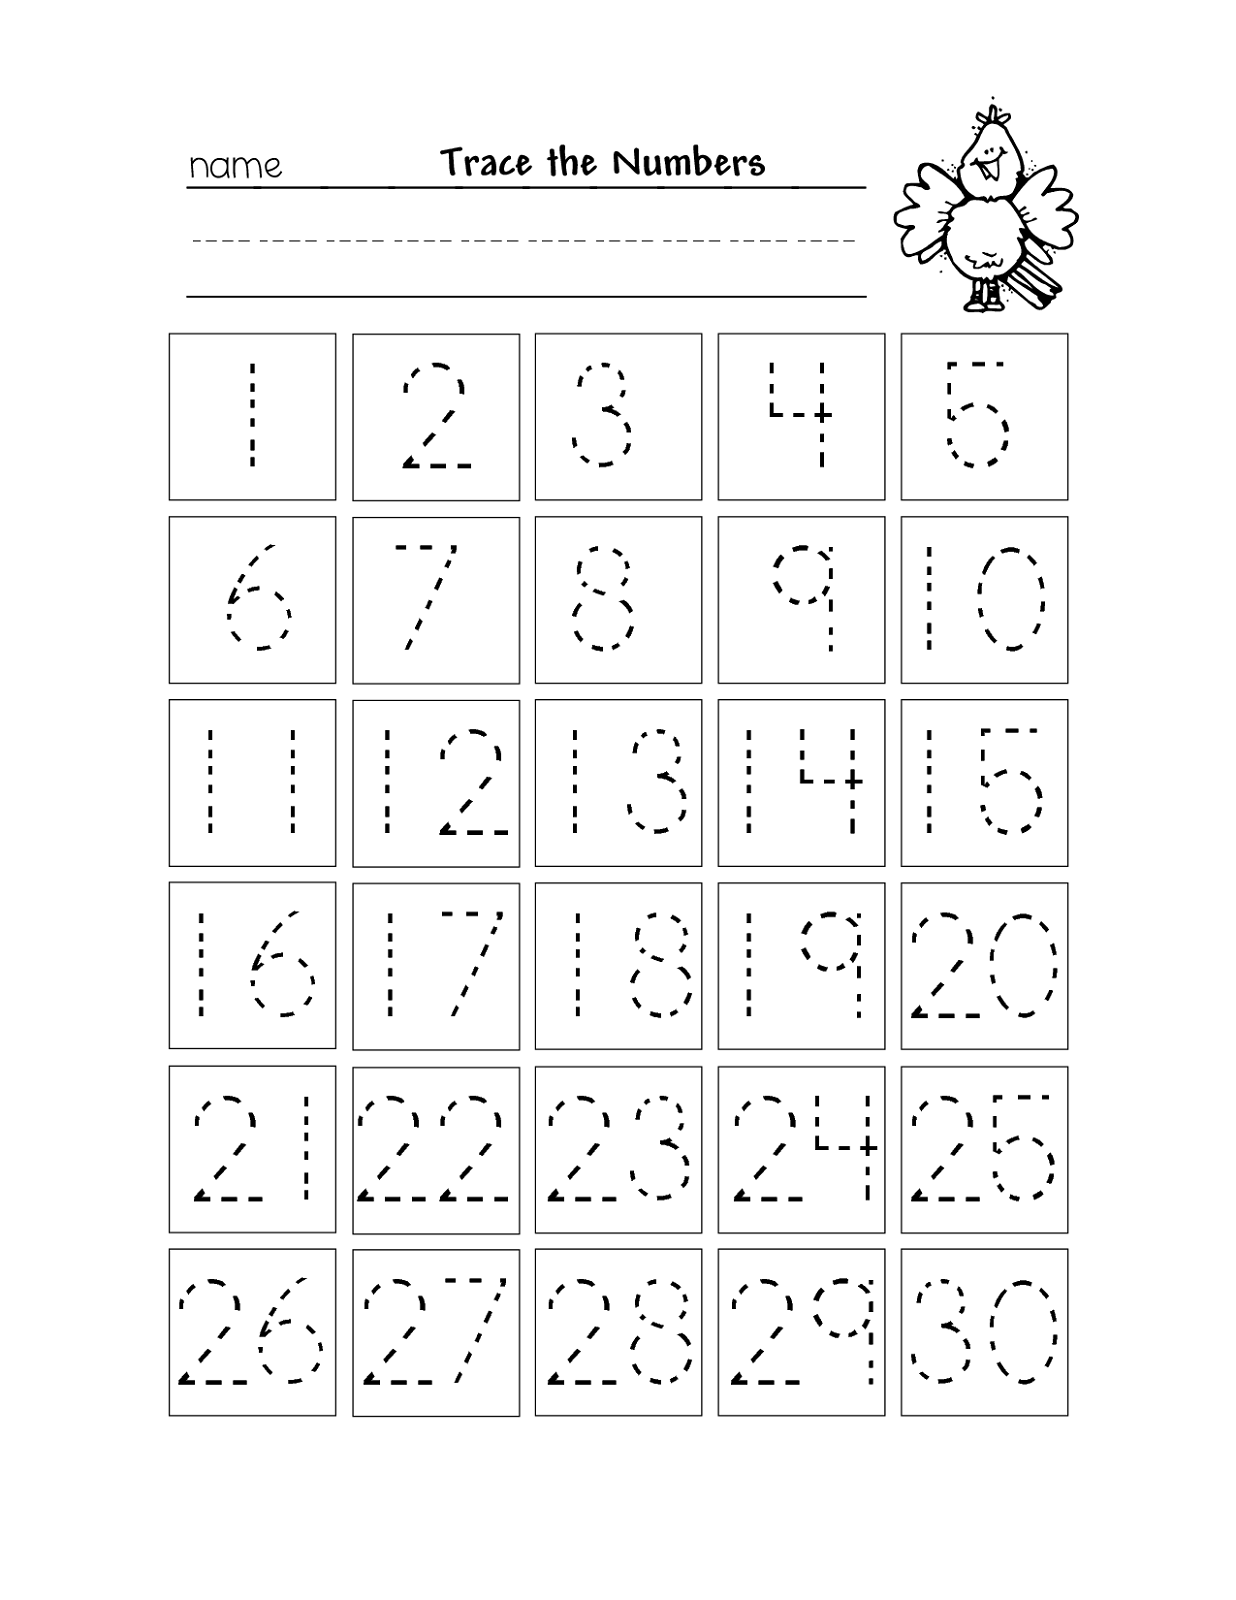 Free Printable Number Chart 130 Activity Shelter